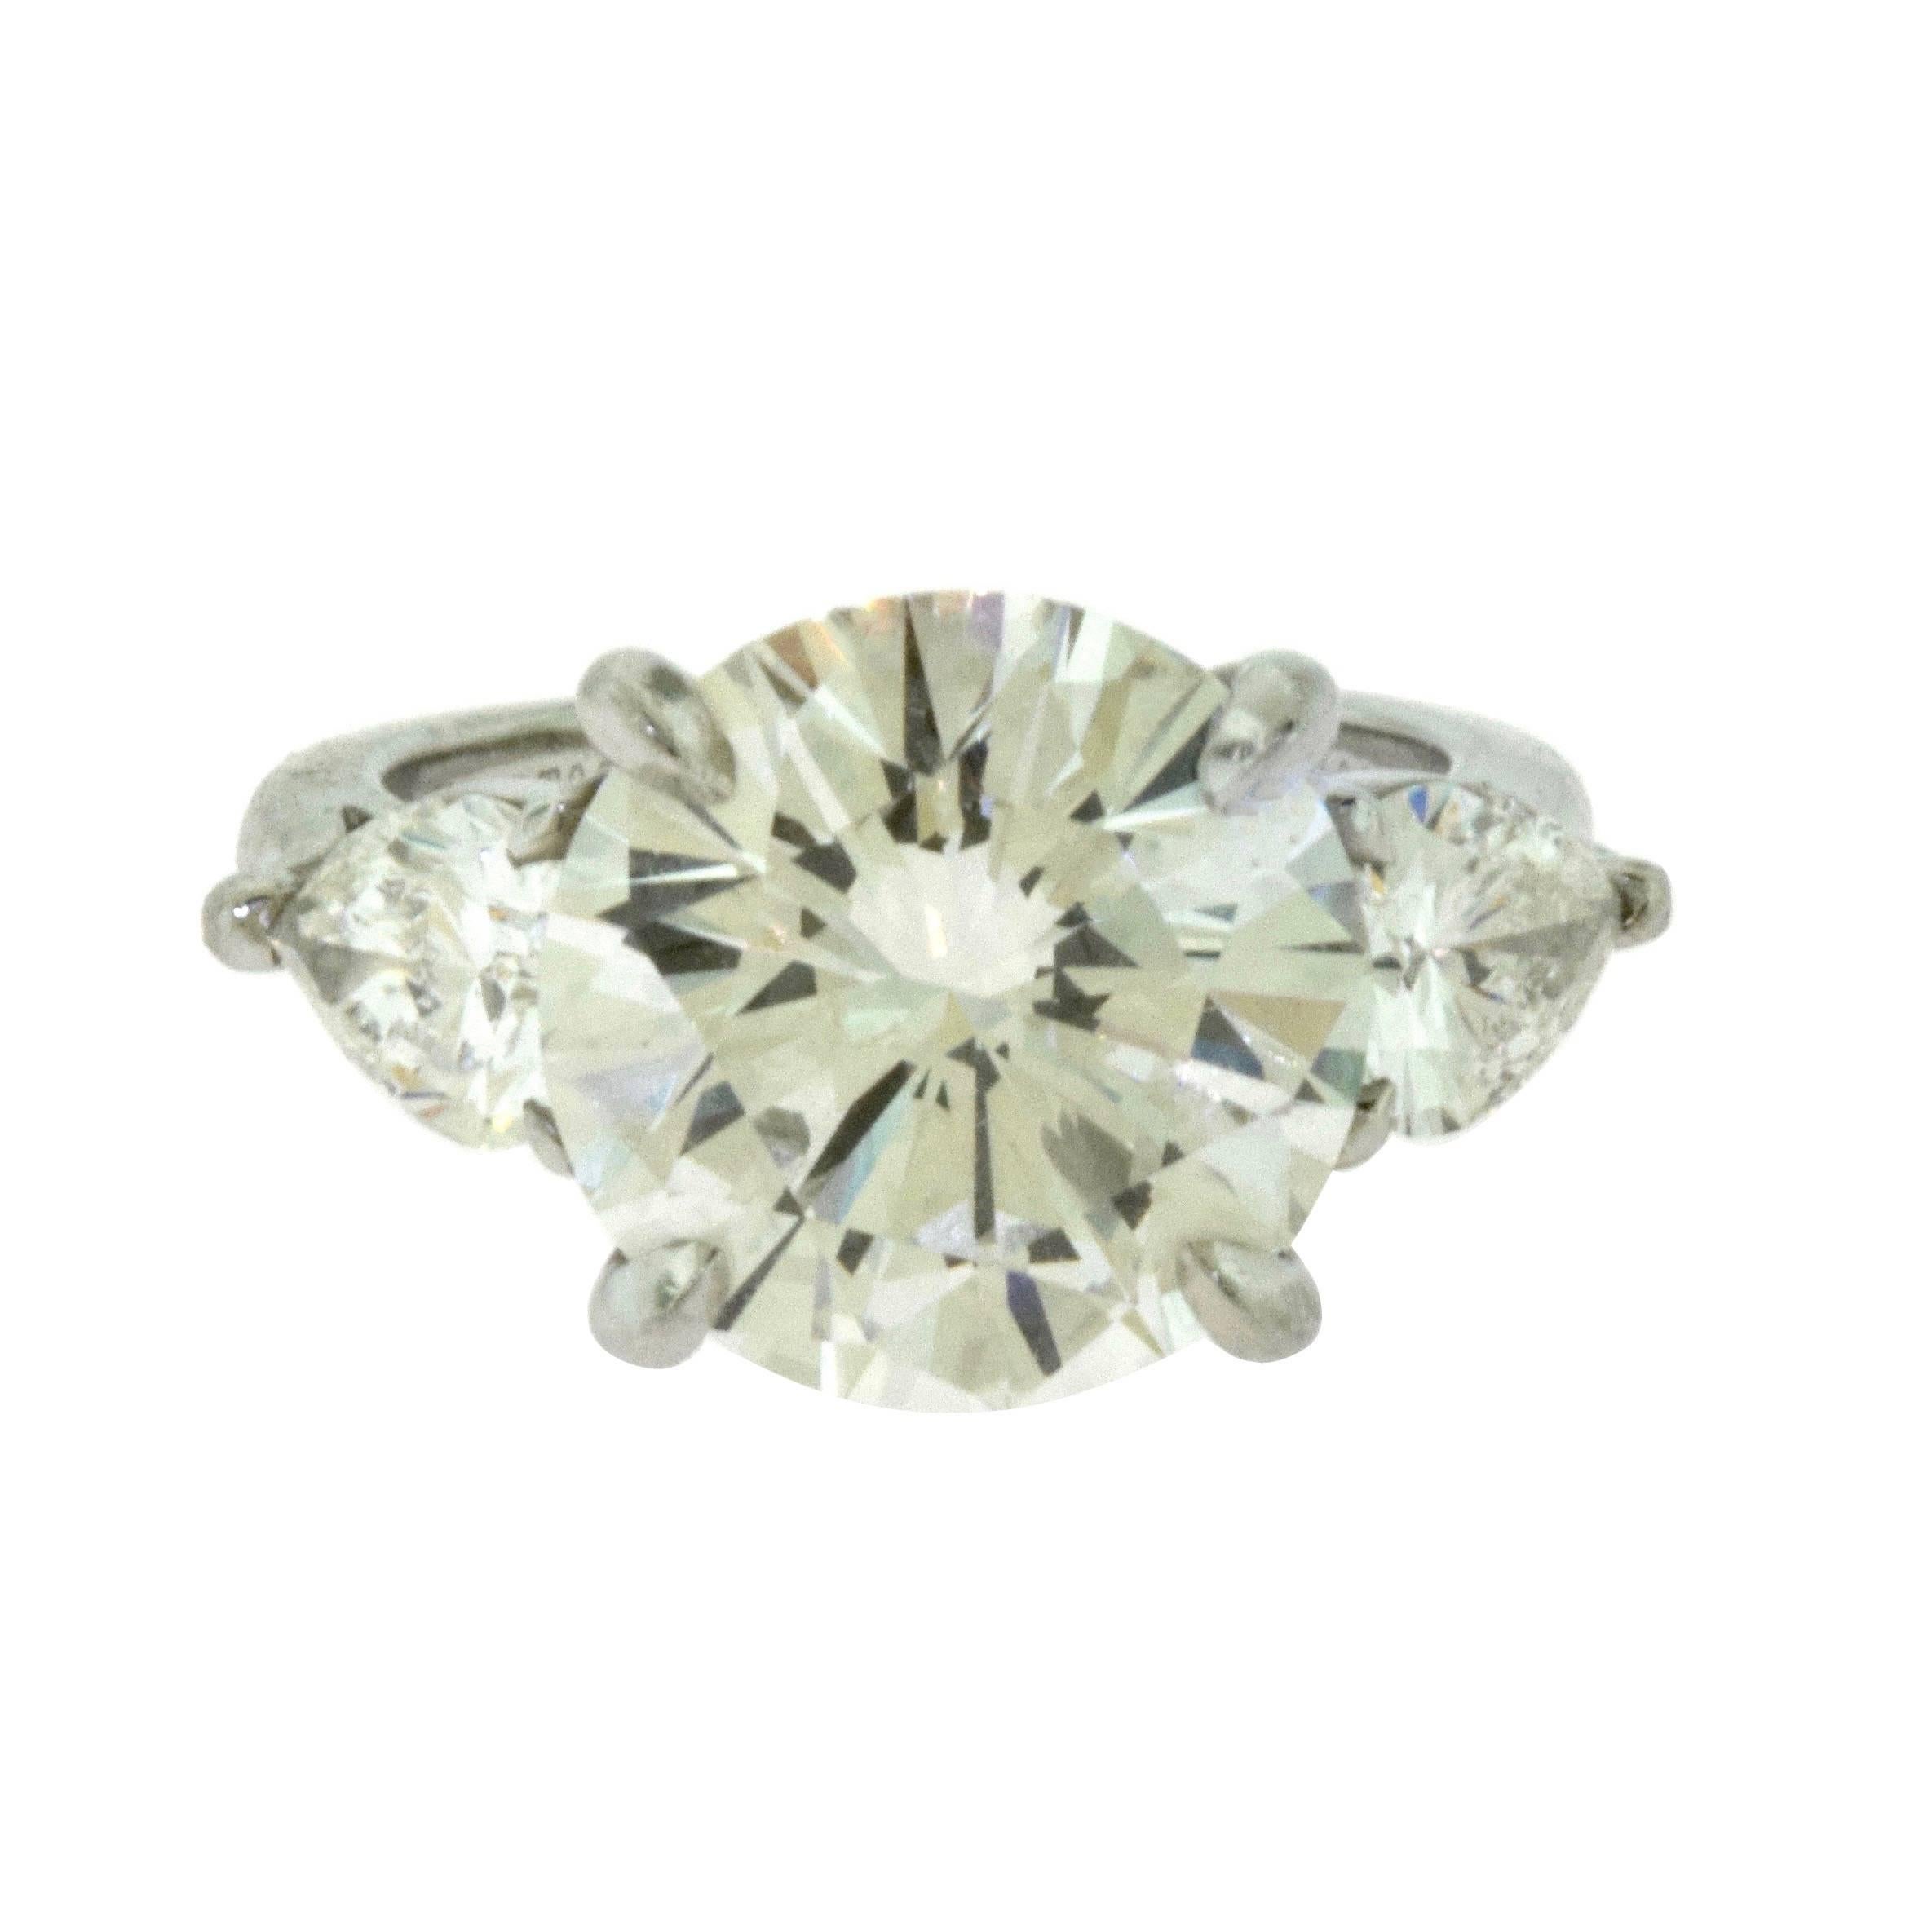 Tiffany & Co. 5.26 Carat Center Stone Diamond Engagement Ring in Platinum For Sale